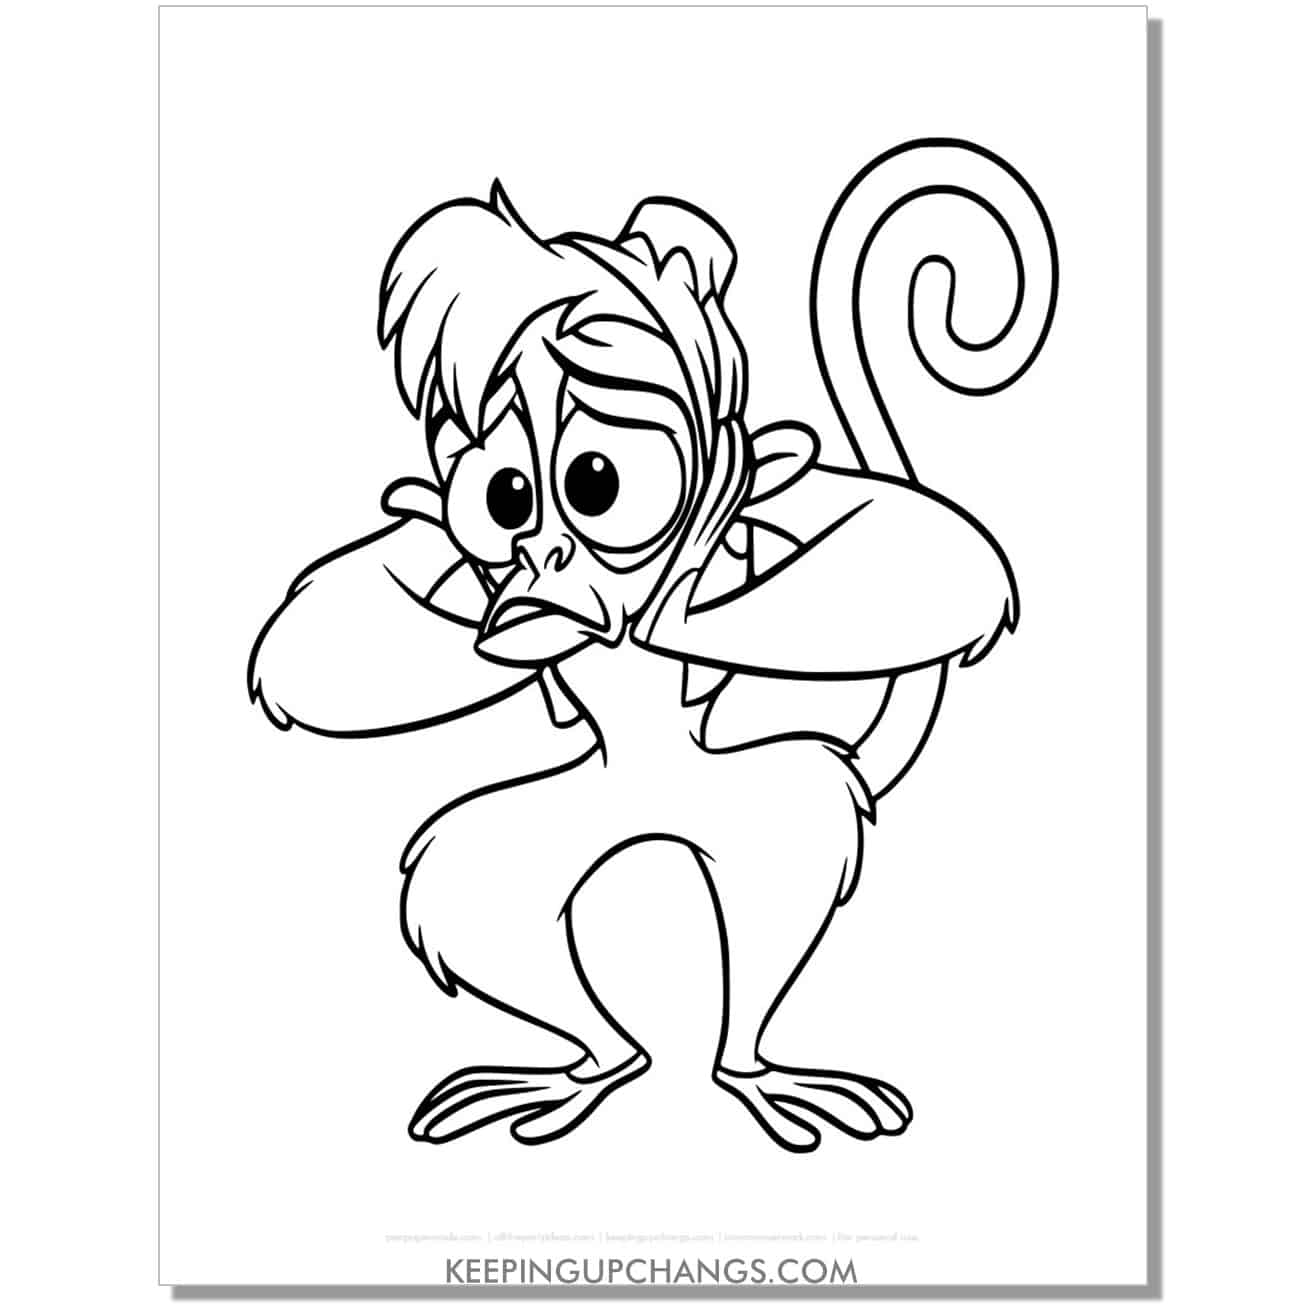 aladdin abu with concerned look coloring page, sheet.